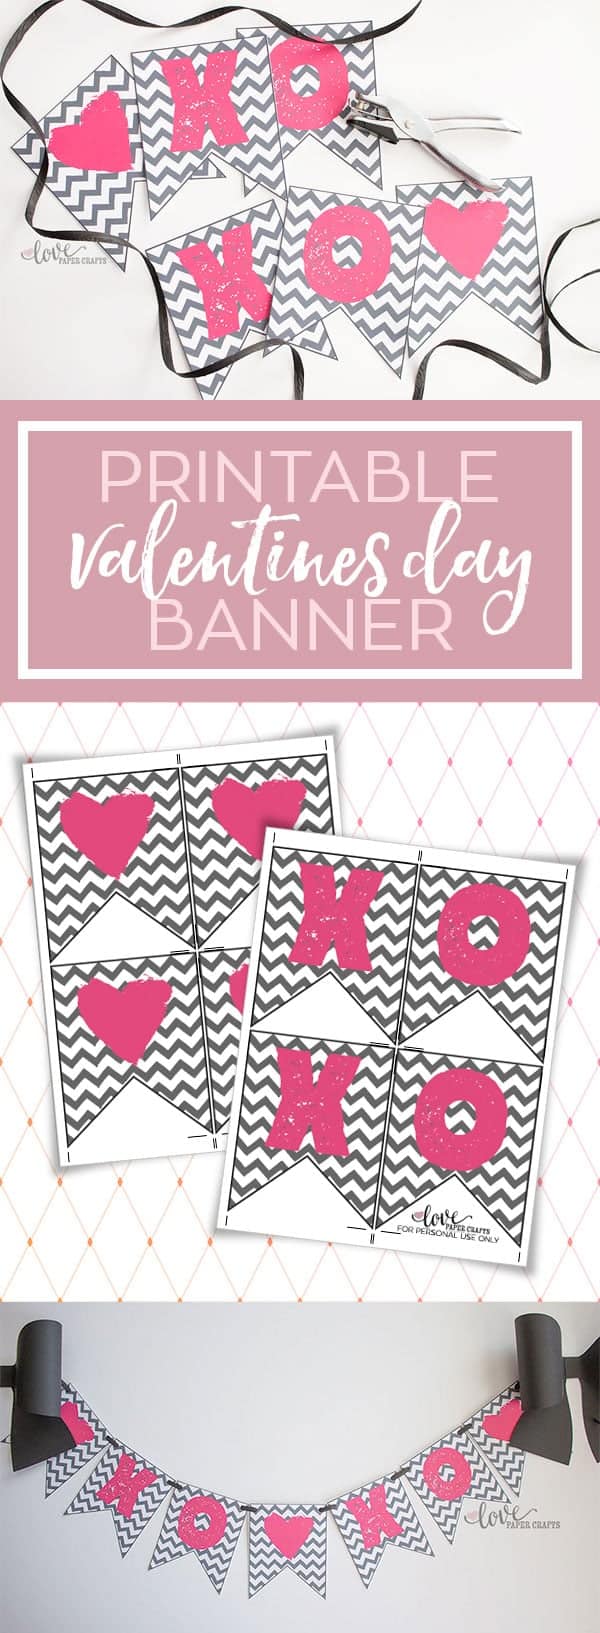 Free Printable XOXO Pink and Grey Valentine's Day Banner for Decorating the Fireplace Mantel or the Classroom | LovePaperCrafts.com